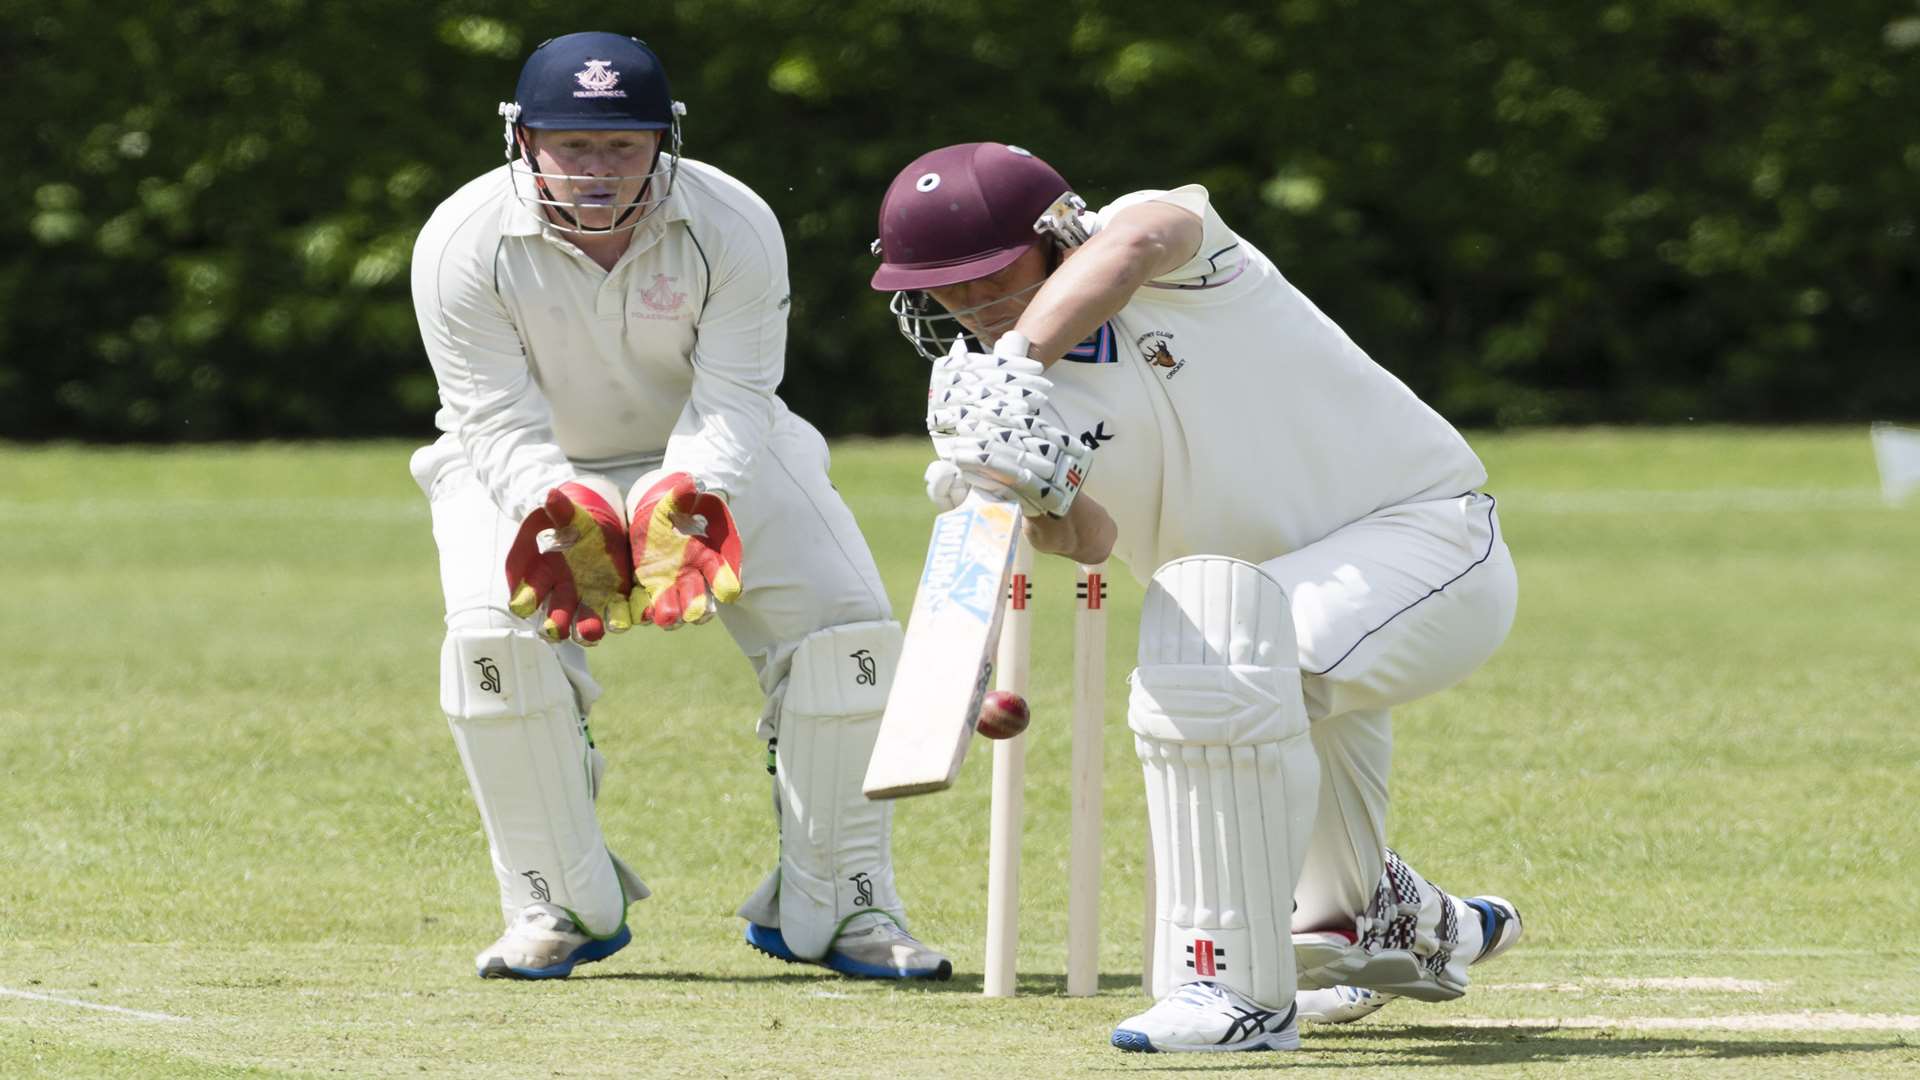 Hartley Country Club's Charlie Hemphrey batting against Folkestone Picture: Andy Payton